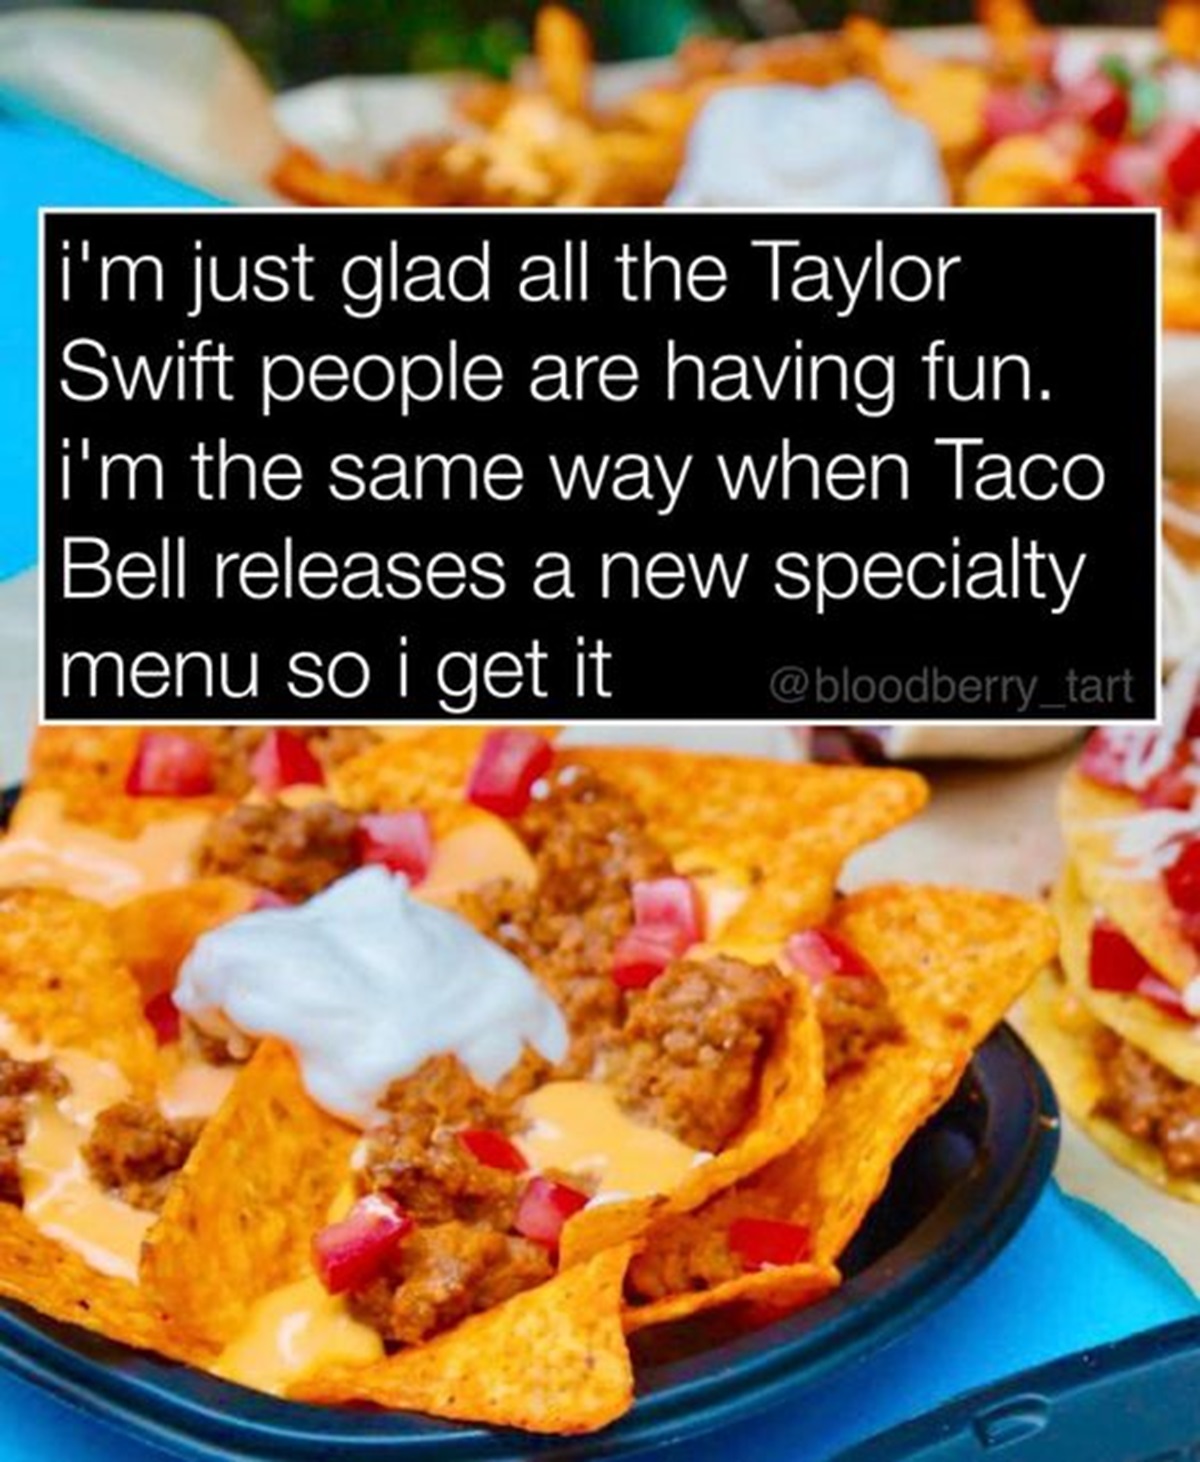 Taylor Swift - i'm just glad all the Taylor Swift people are having fun. i'm the same way when Taco Bell releases a new specialty menu so i get it